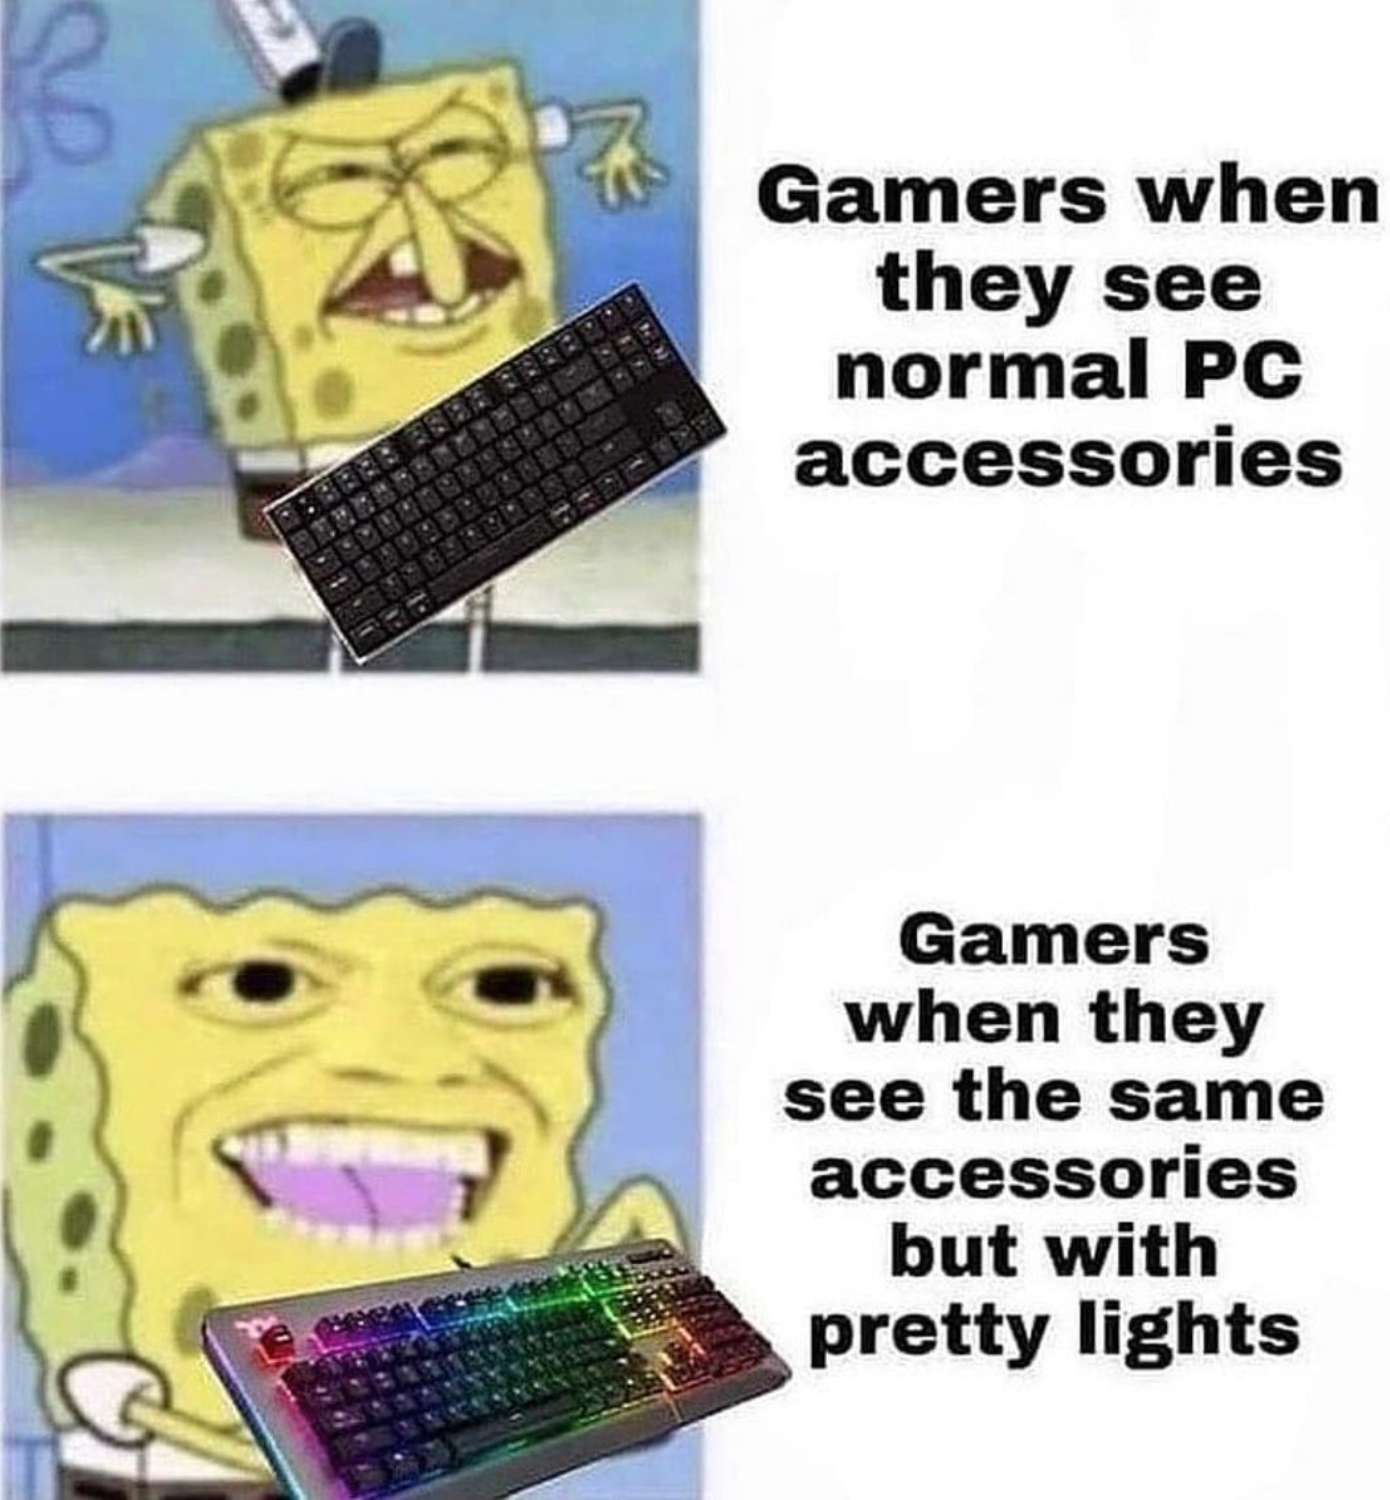 funny gaming memes - spongebob wallet meme - 18 no Gamers when they see normal Pc accessories Gamers when they see the same accessories but with pretty lights